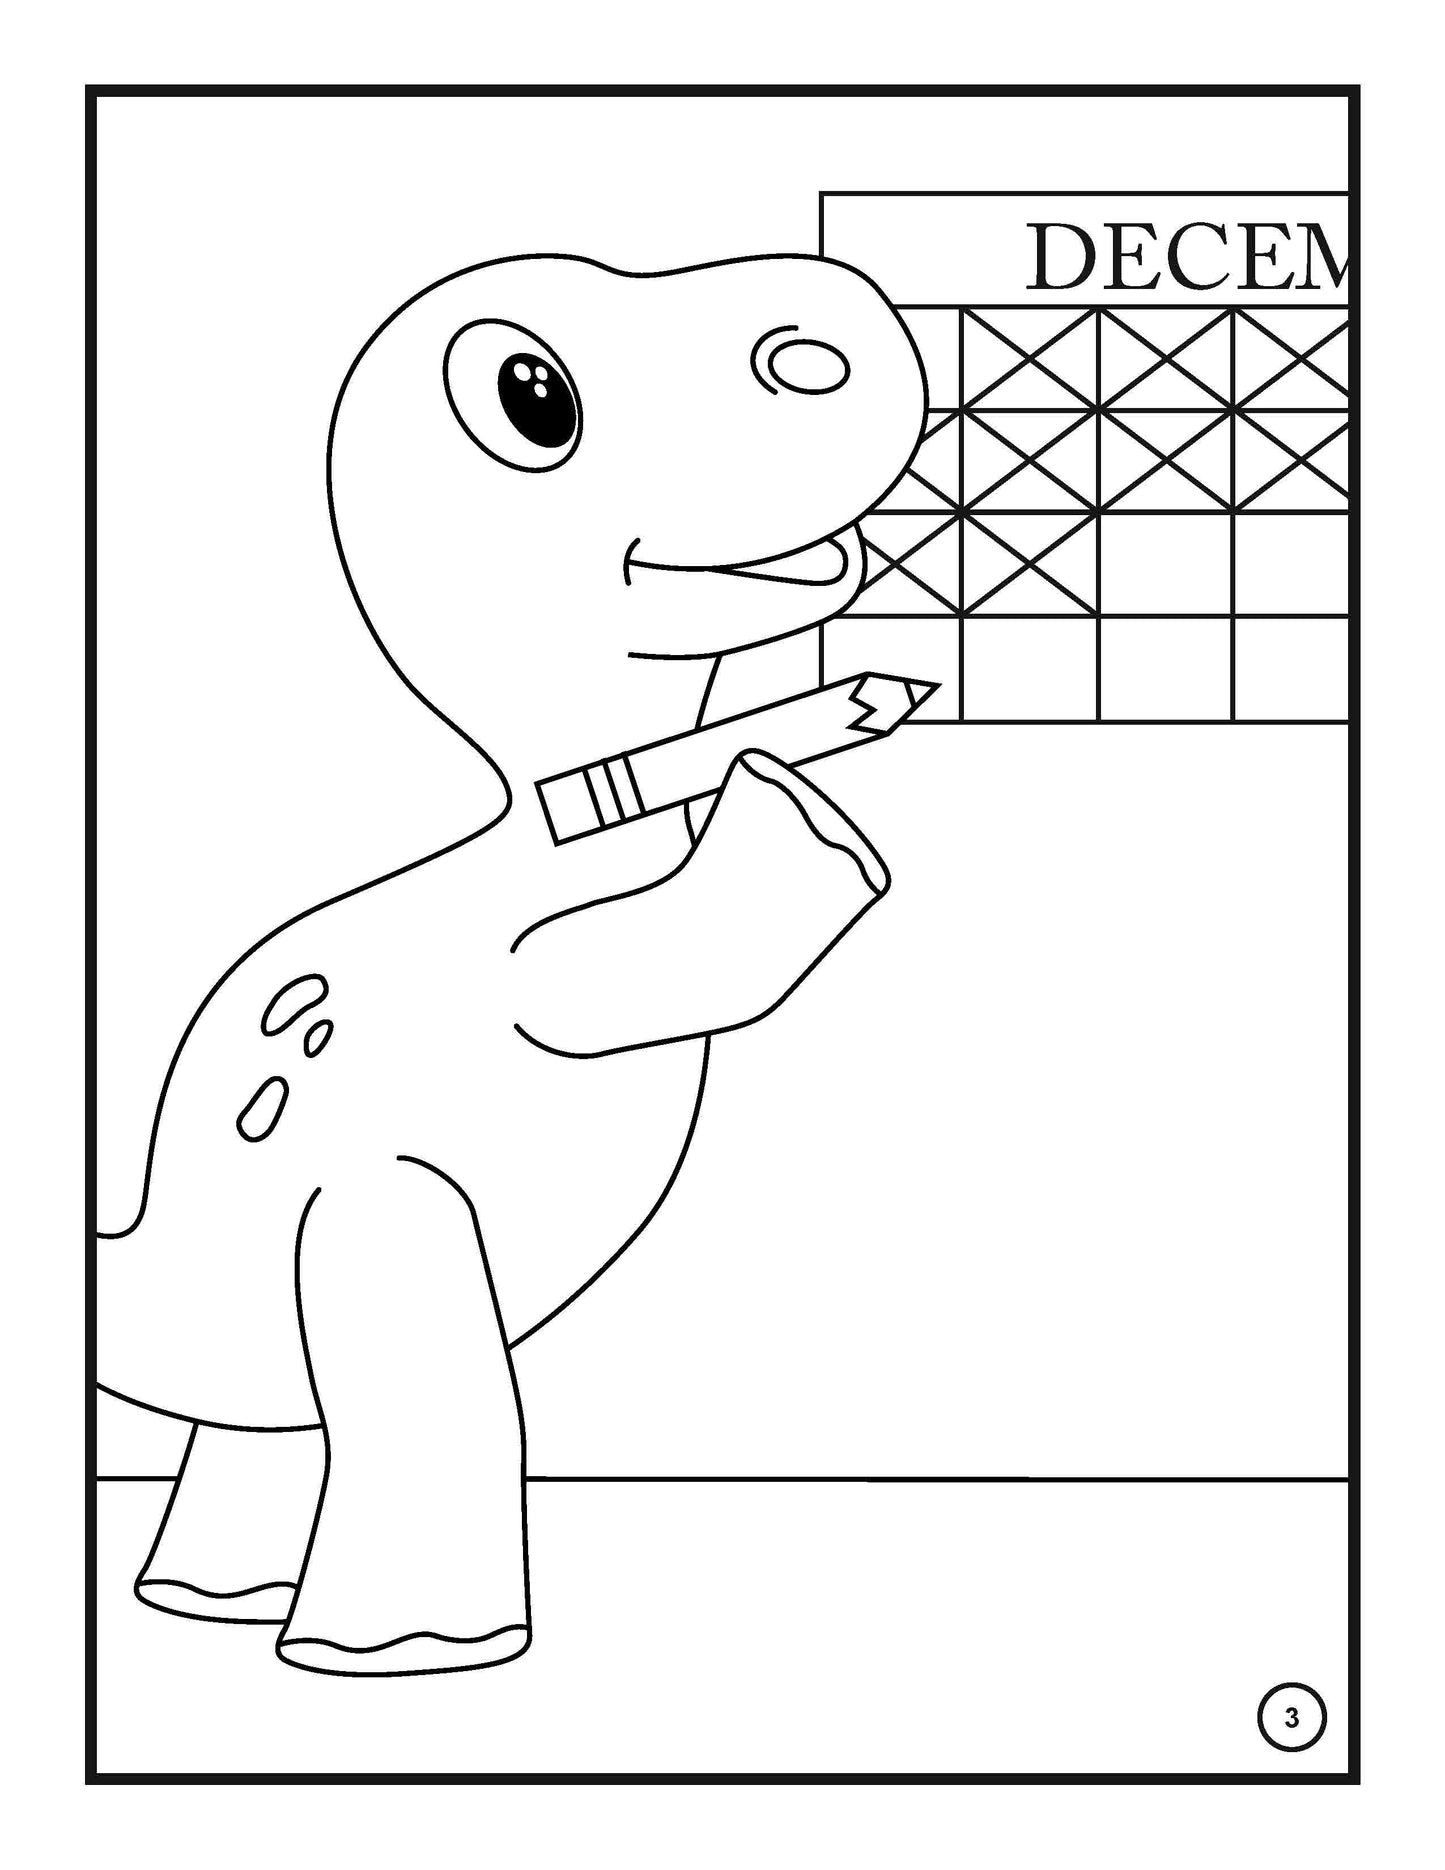 Darren's Christmas Adventure - A Storytime Coloring Book